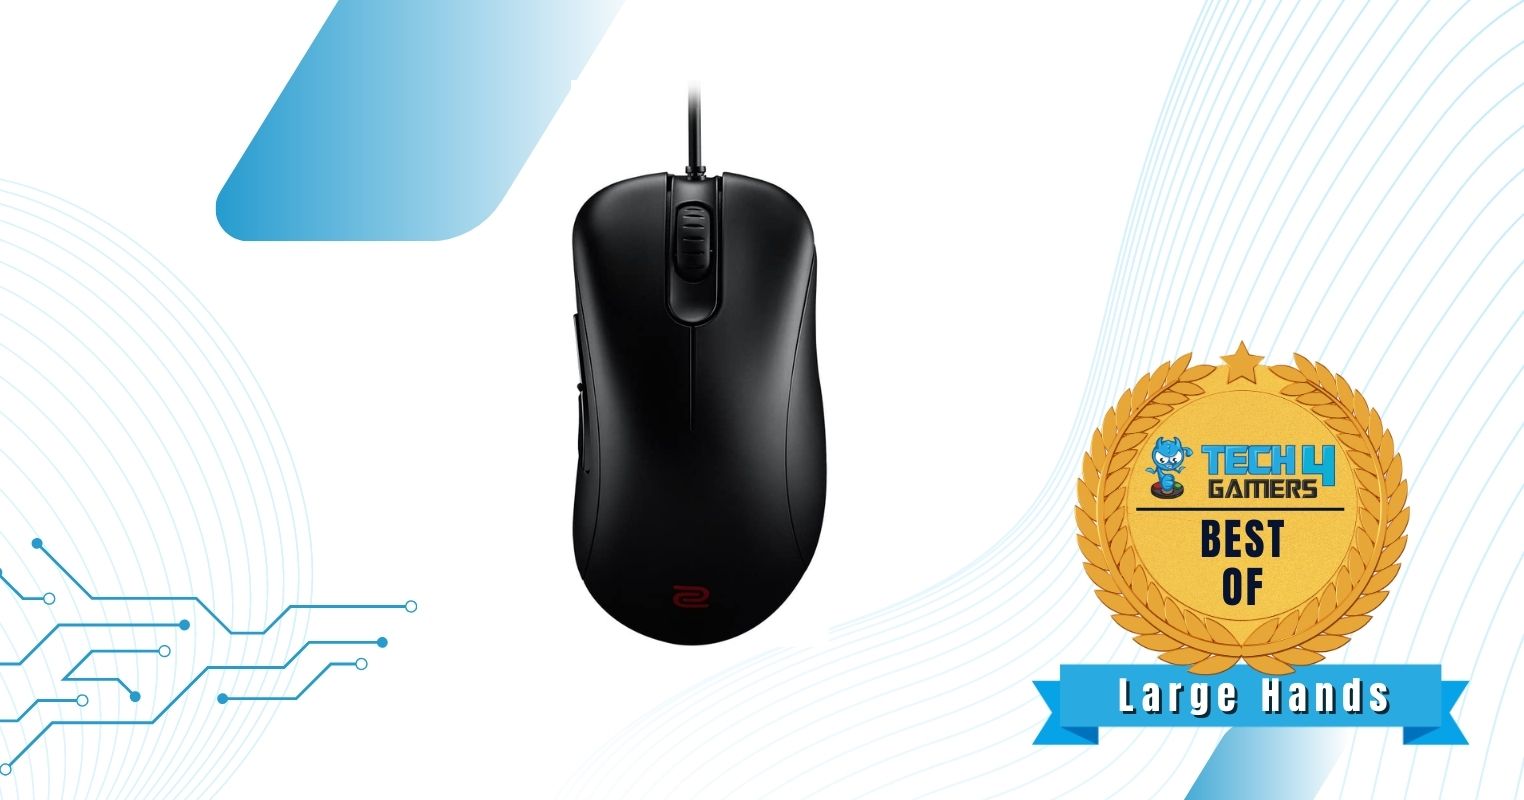 Zowie EC2-B - Best Claw Grip Gaming Mouse For Large Hands